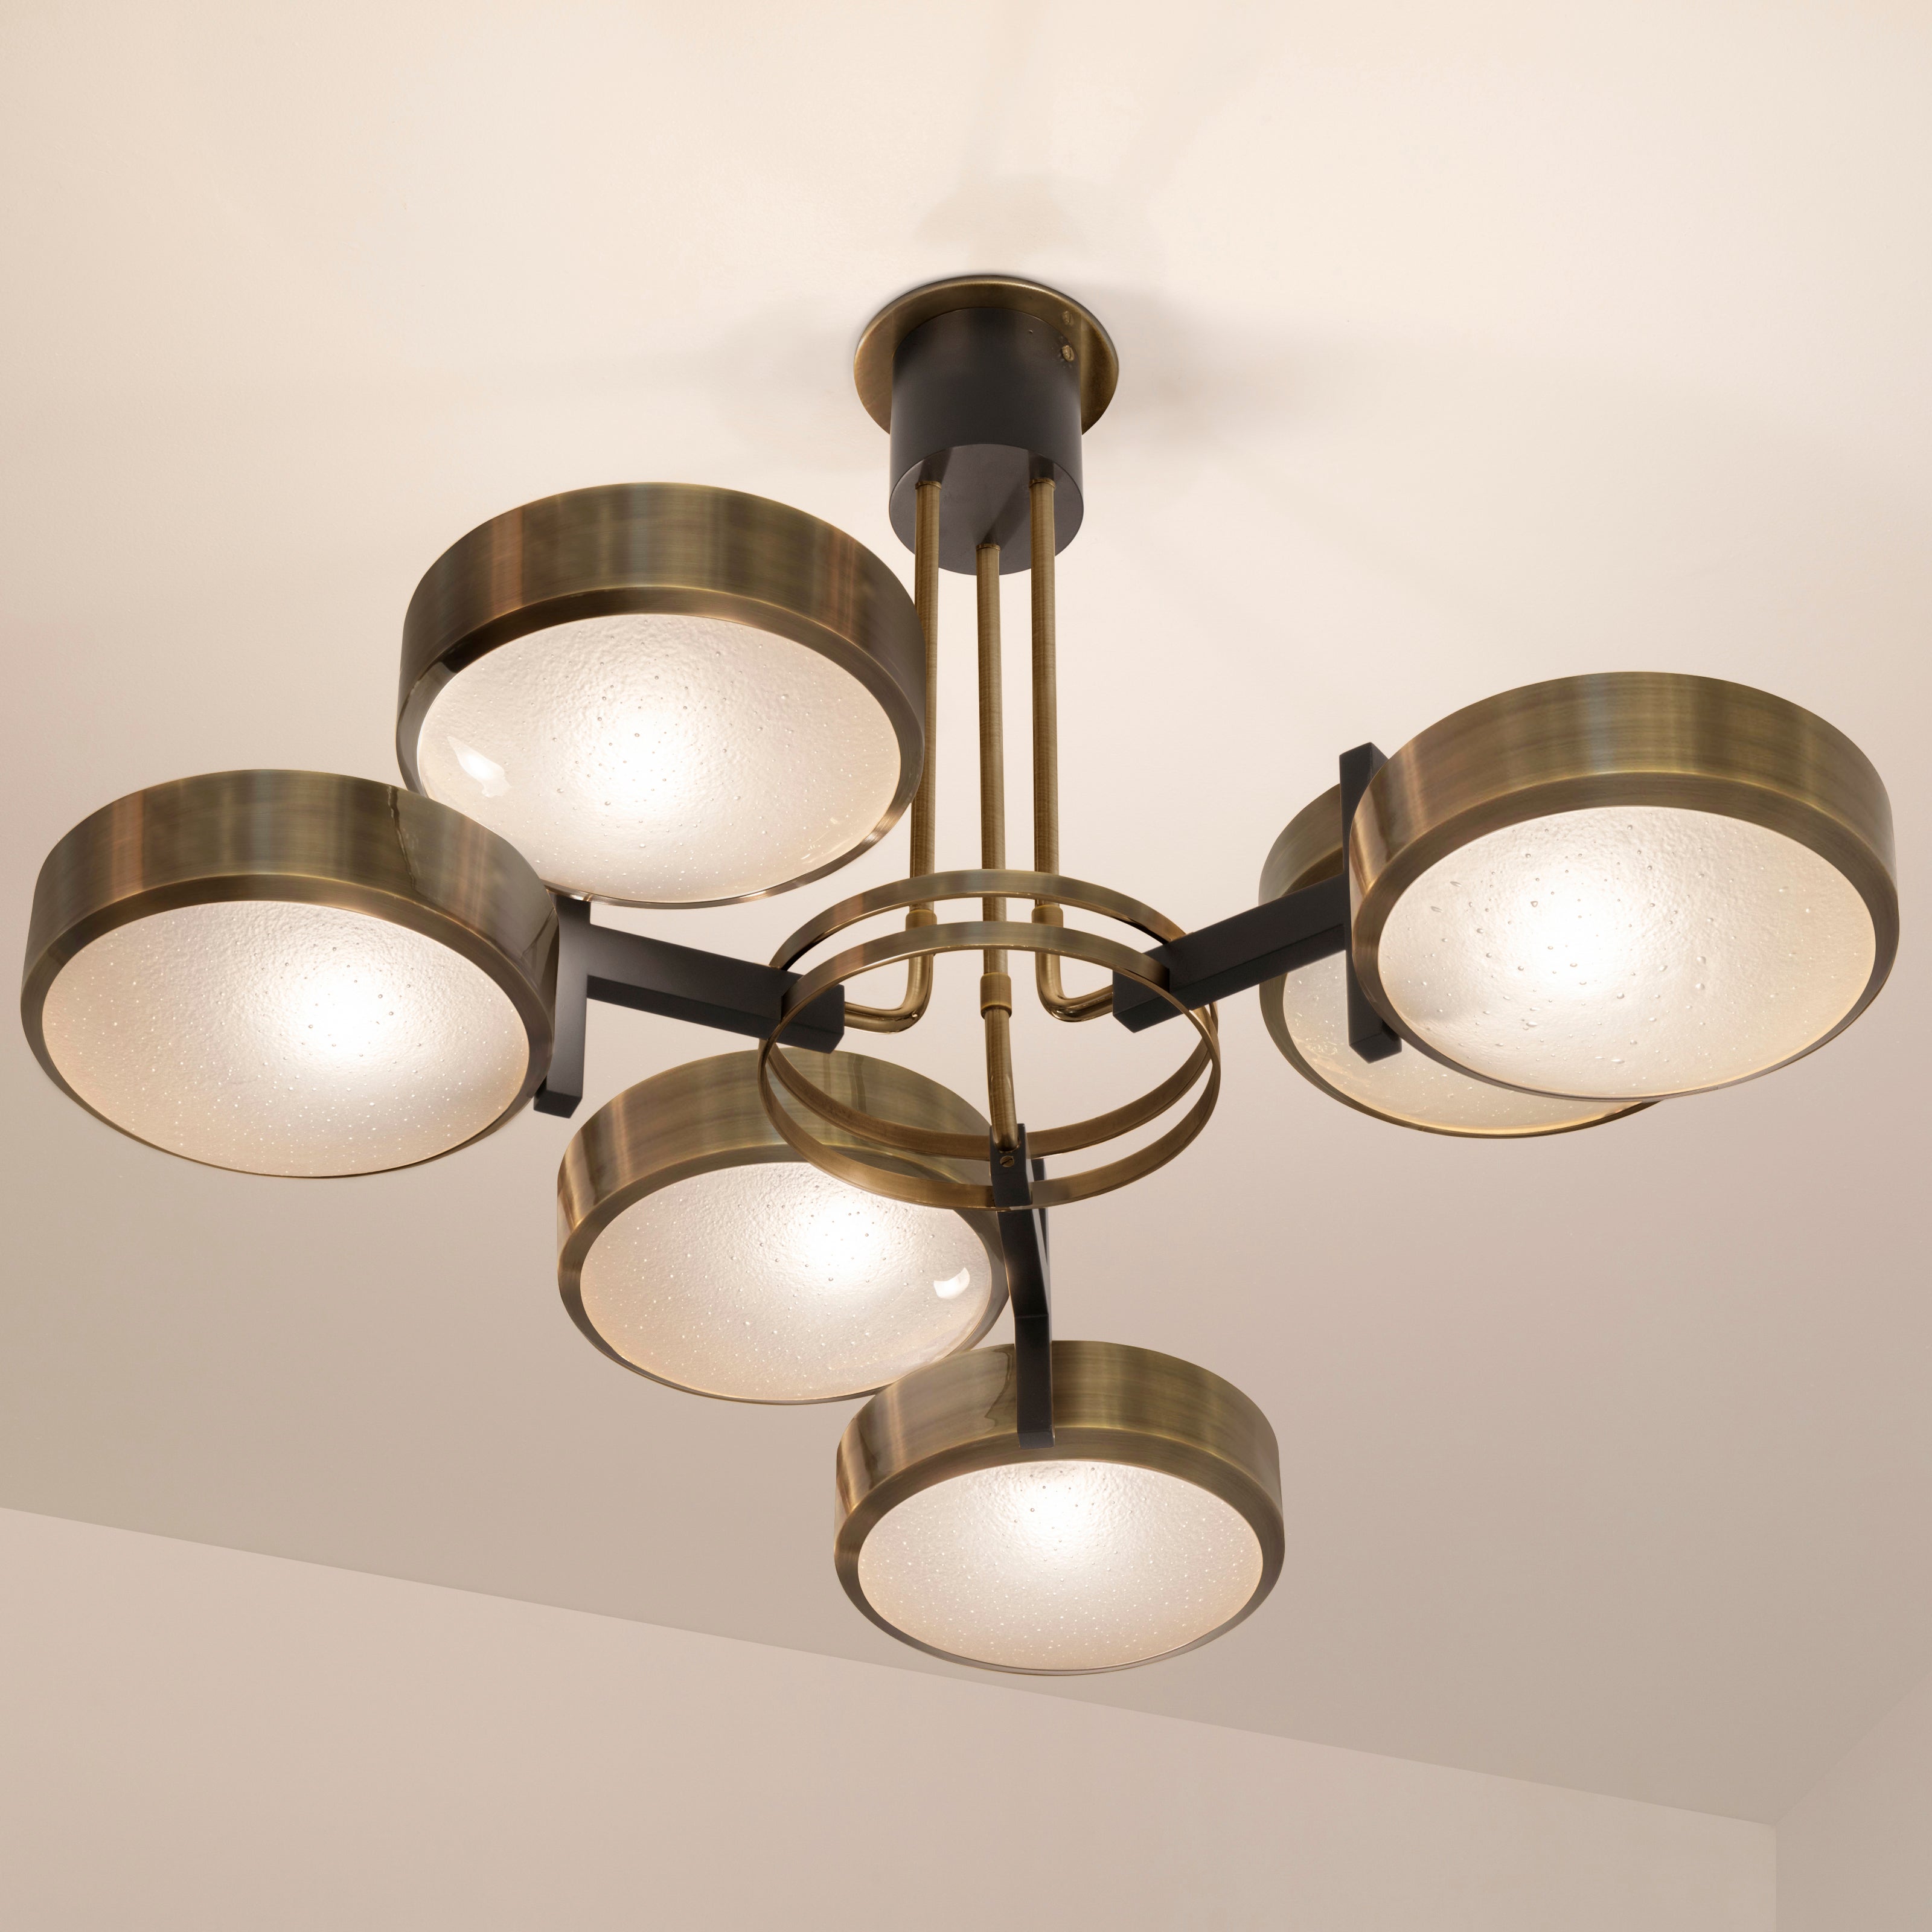 Eclissi Ceiling Light by Gaspare Asaro-Polished Nickel and Black Finish For Sale 1